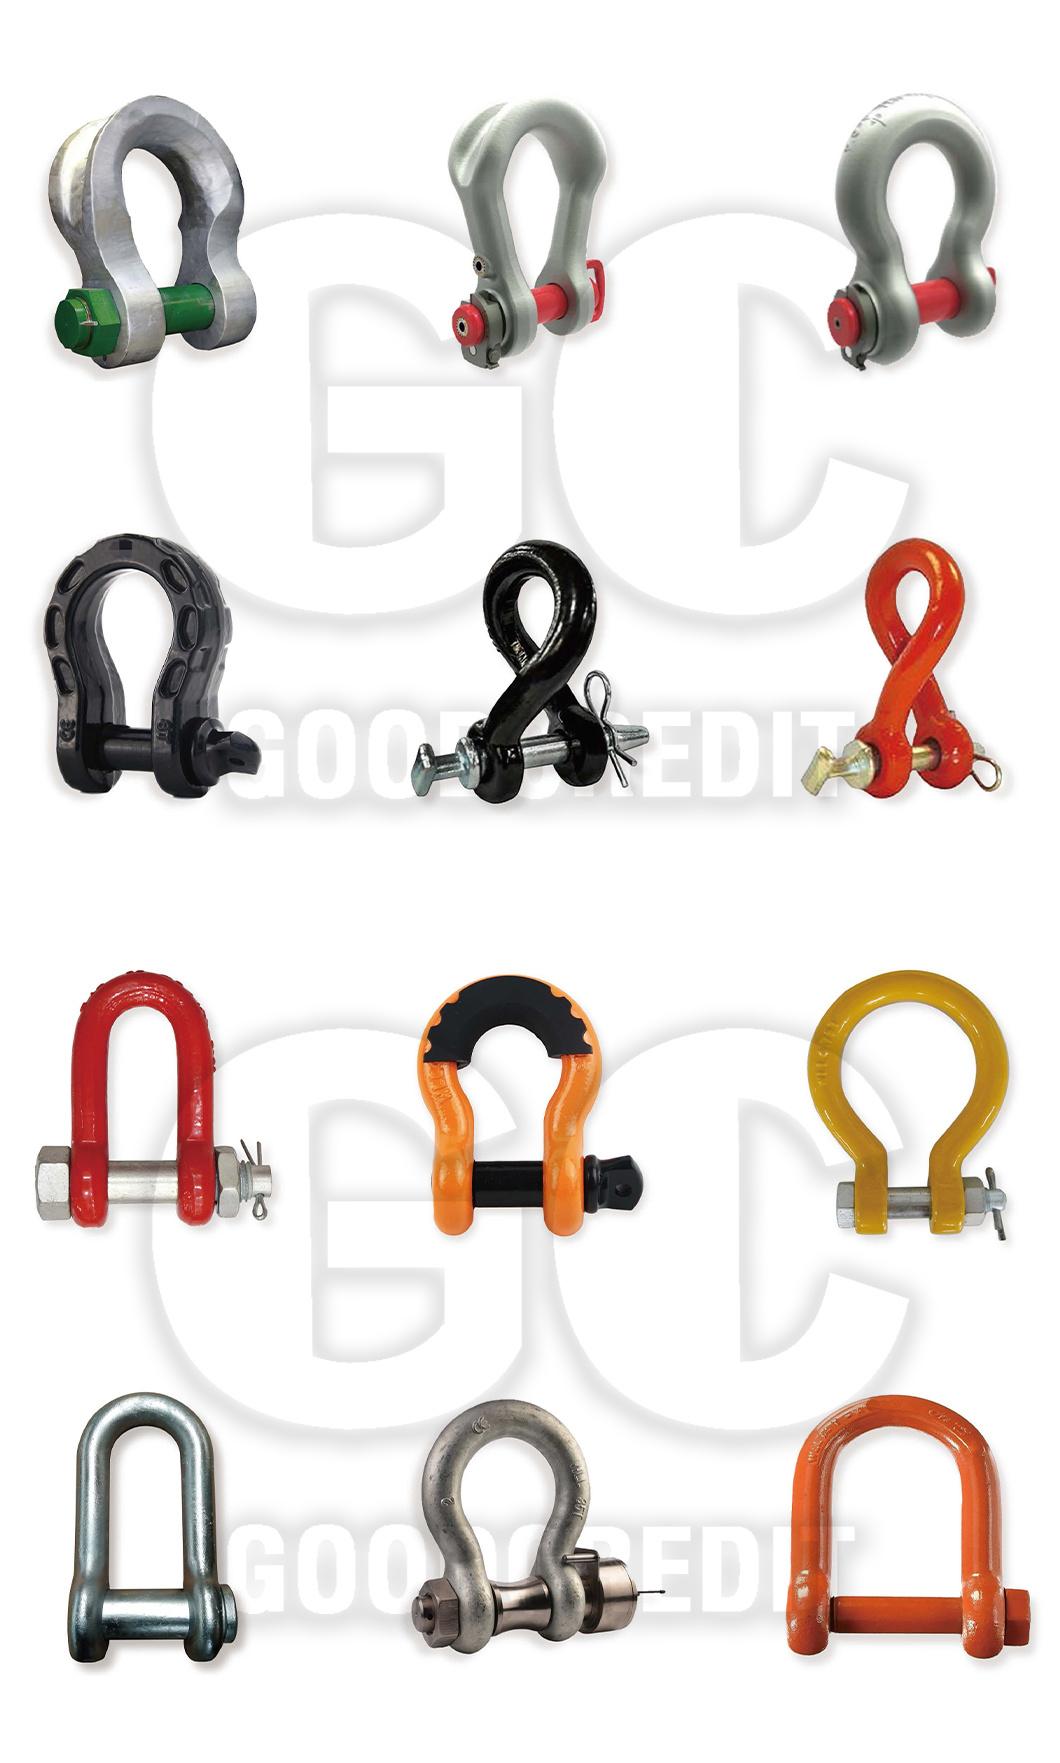 Rigging Hardware Electric/Hot DIP Galvanized Forged Carbon/Alloy/Stainless Steel G209/210/2130/2150 Screw Pin Anchor Bow Shackle with Painted Bolt for Lifting